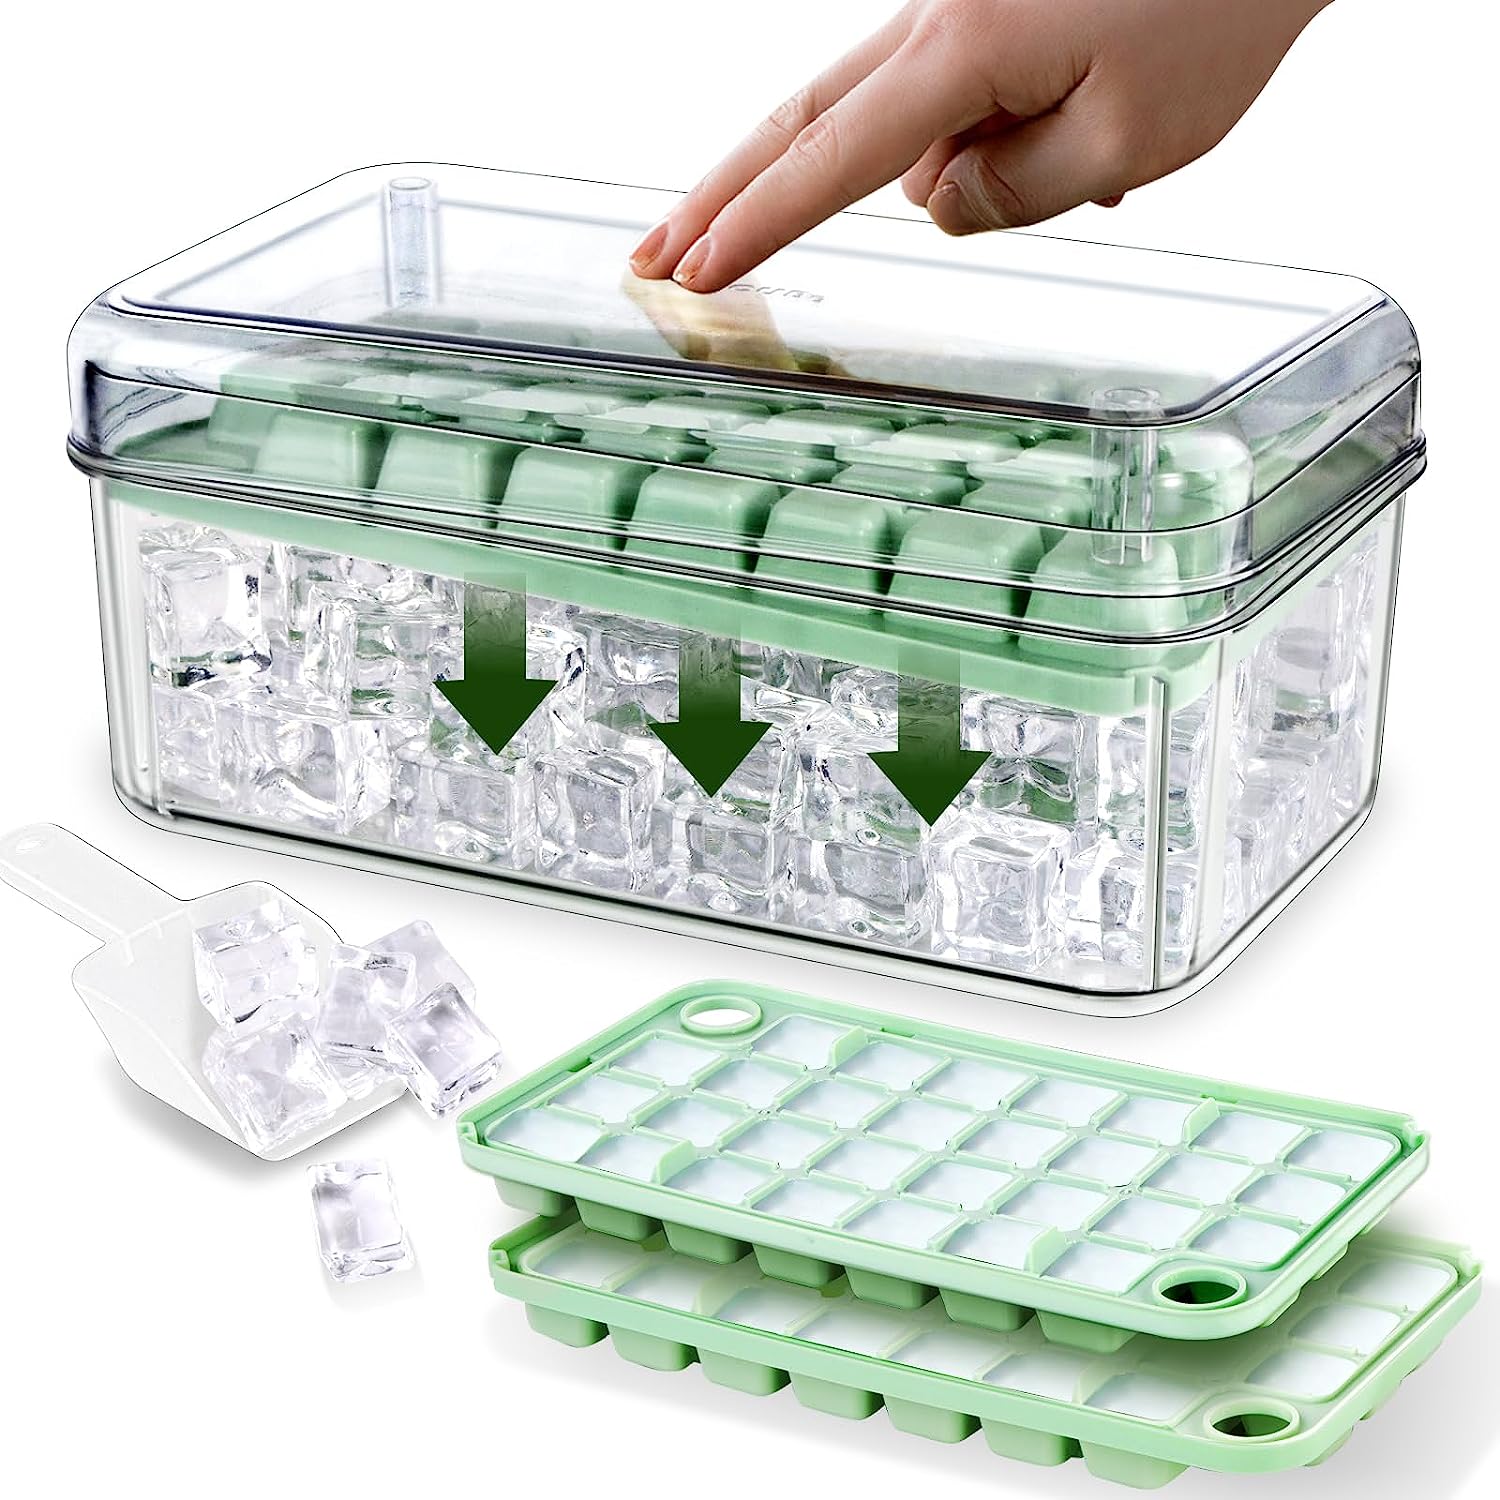 Ice Cube Tray for Freezer Safety Ice Container with Scoop and Cover USA